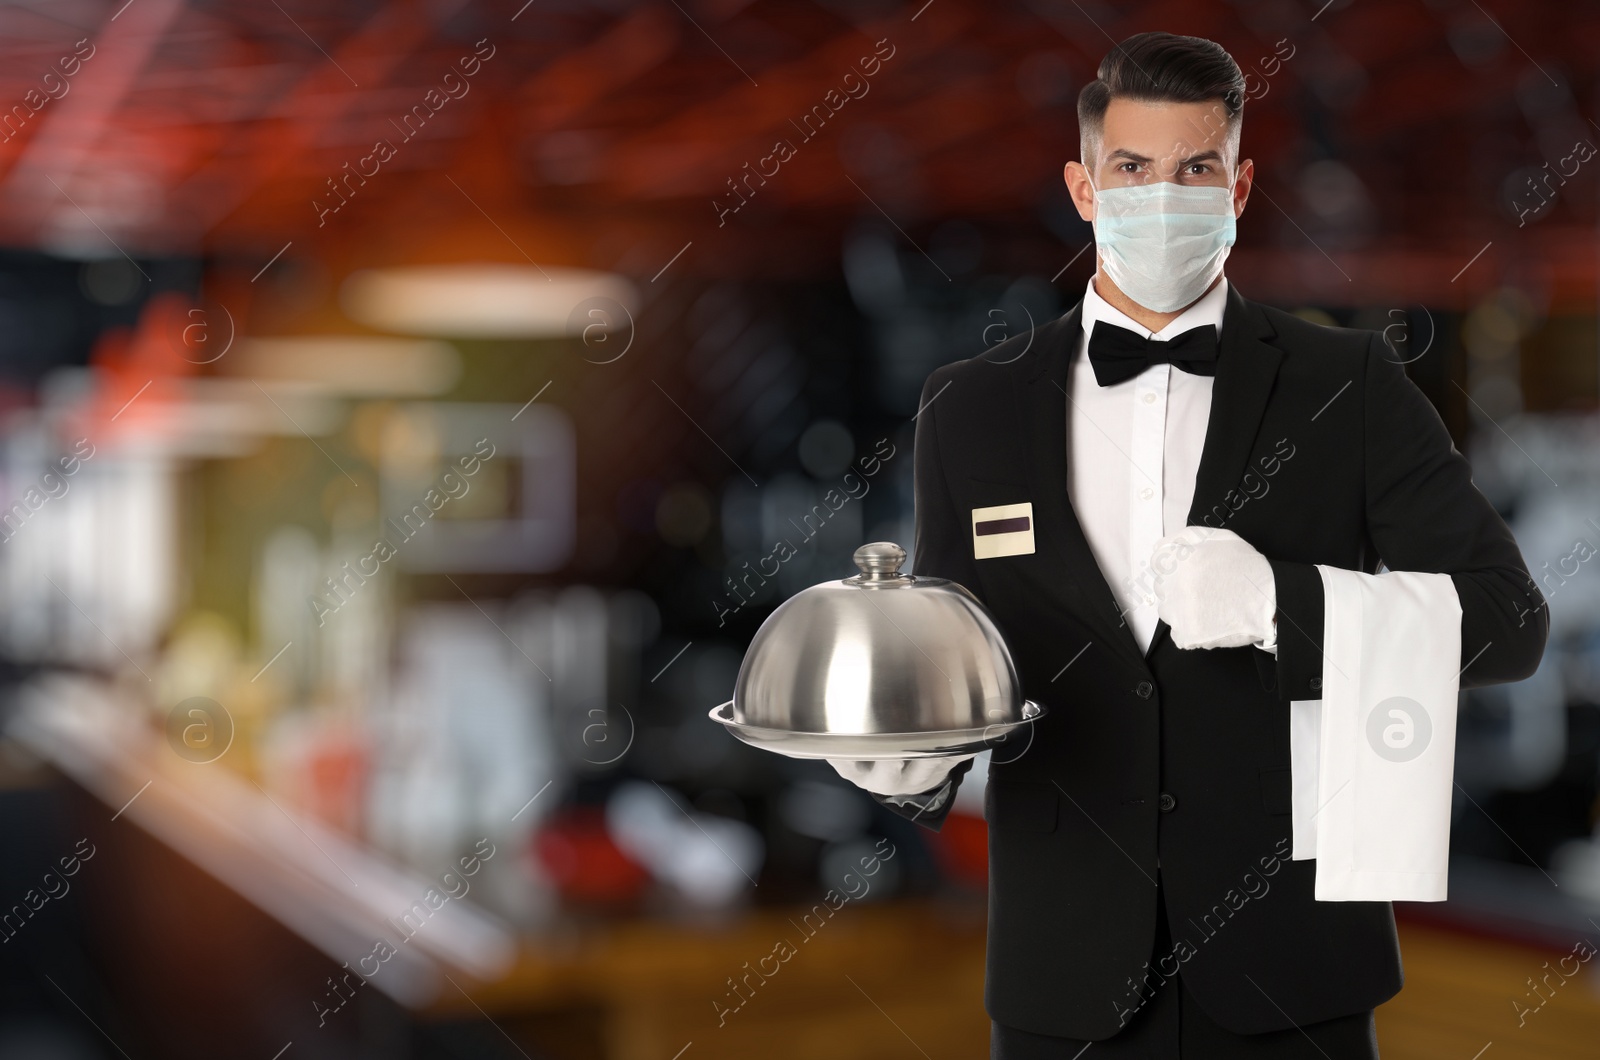 Image of Waiter in medical face mask holding tray with lid in restaurant